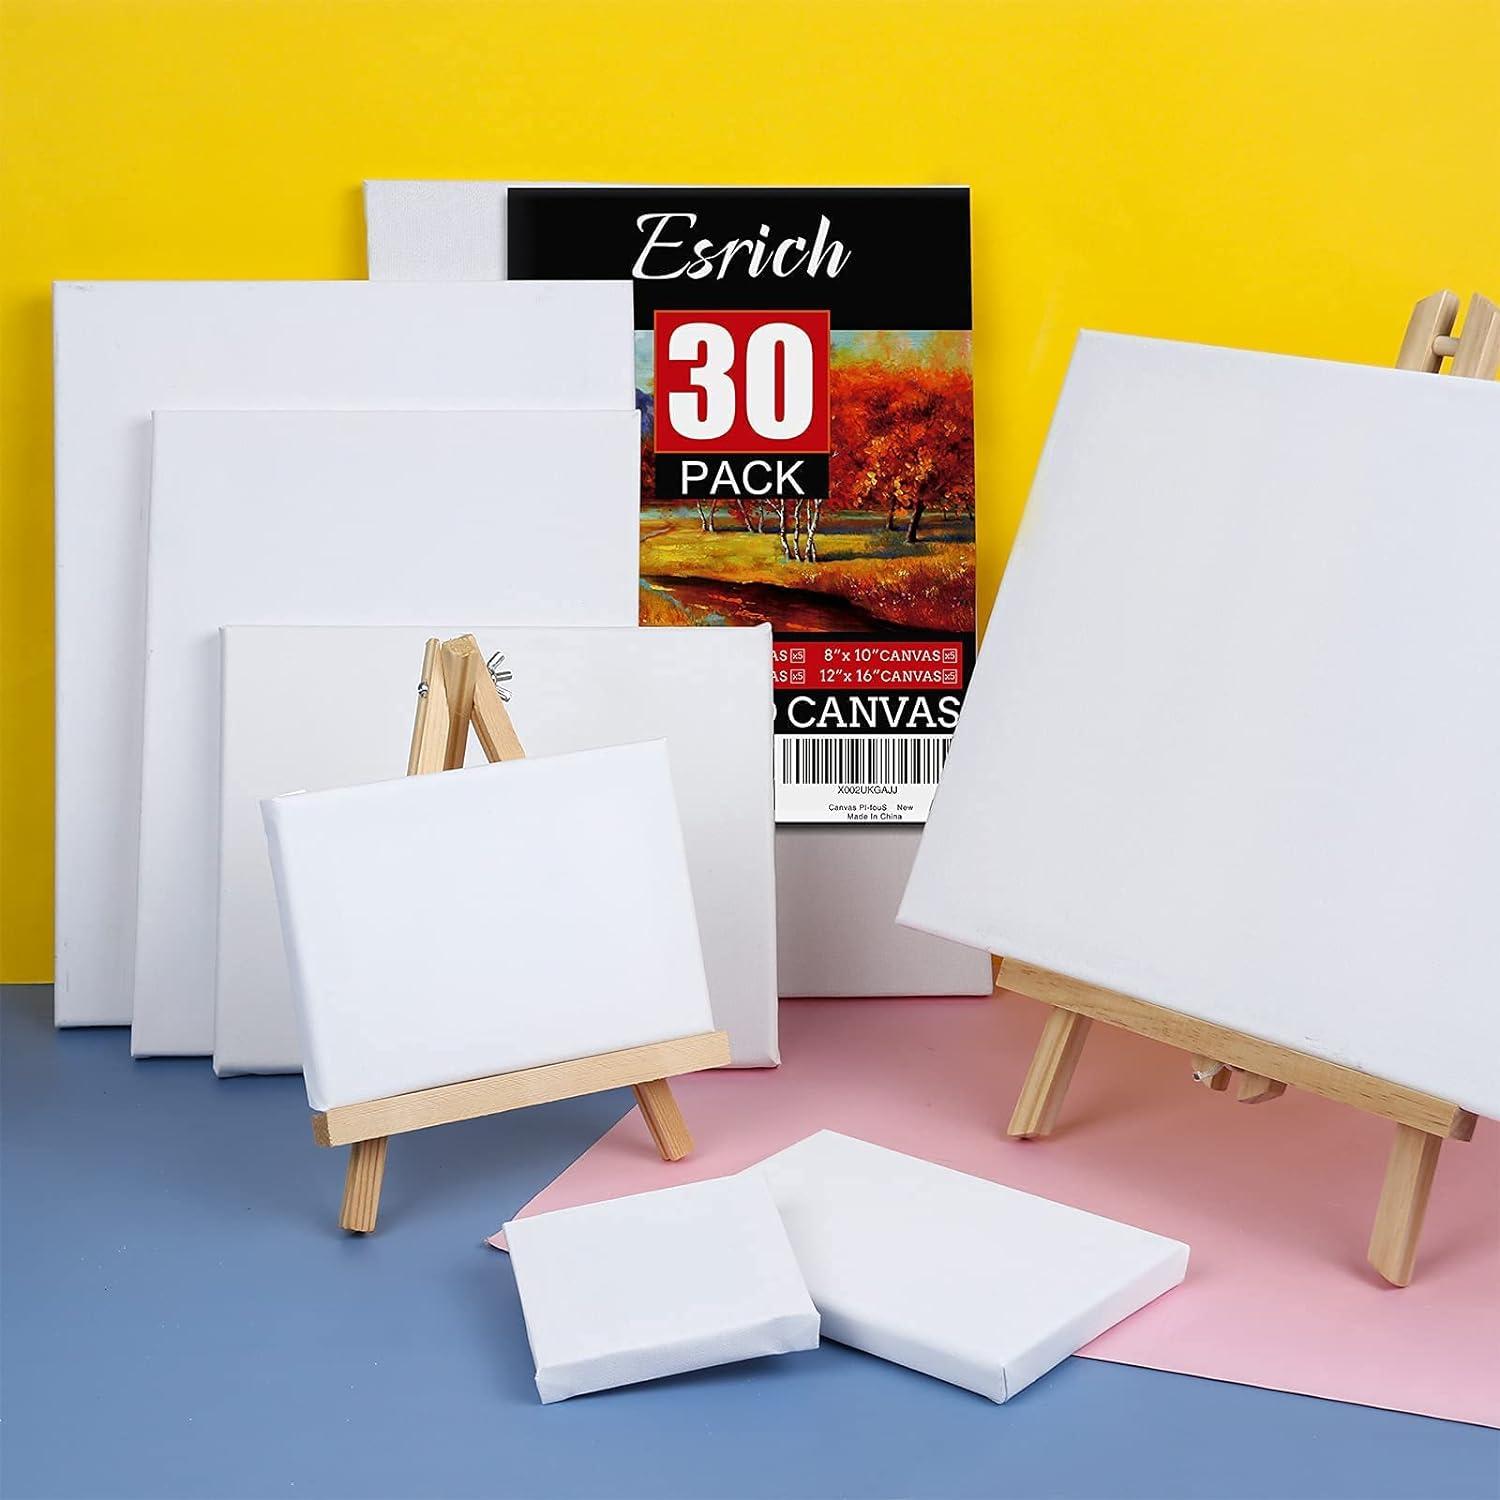 30 Pack Canvases for Painting with 4x4 5x7 8x10 9x12 11x14 12x16 Painting  Canvas for Oil & Acrylic Paint 30 Packs - 6Sizes(5 of Each)